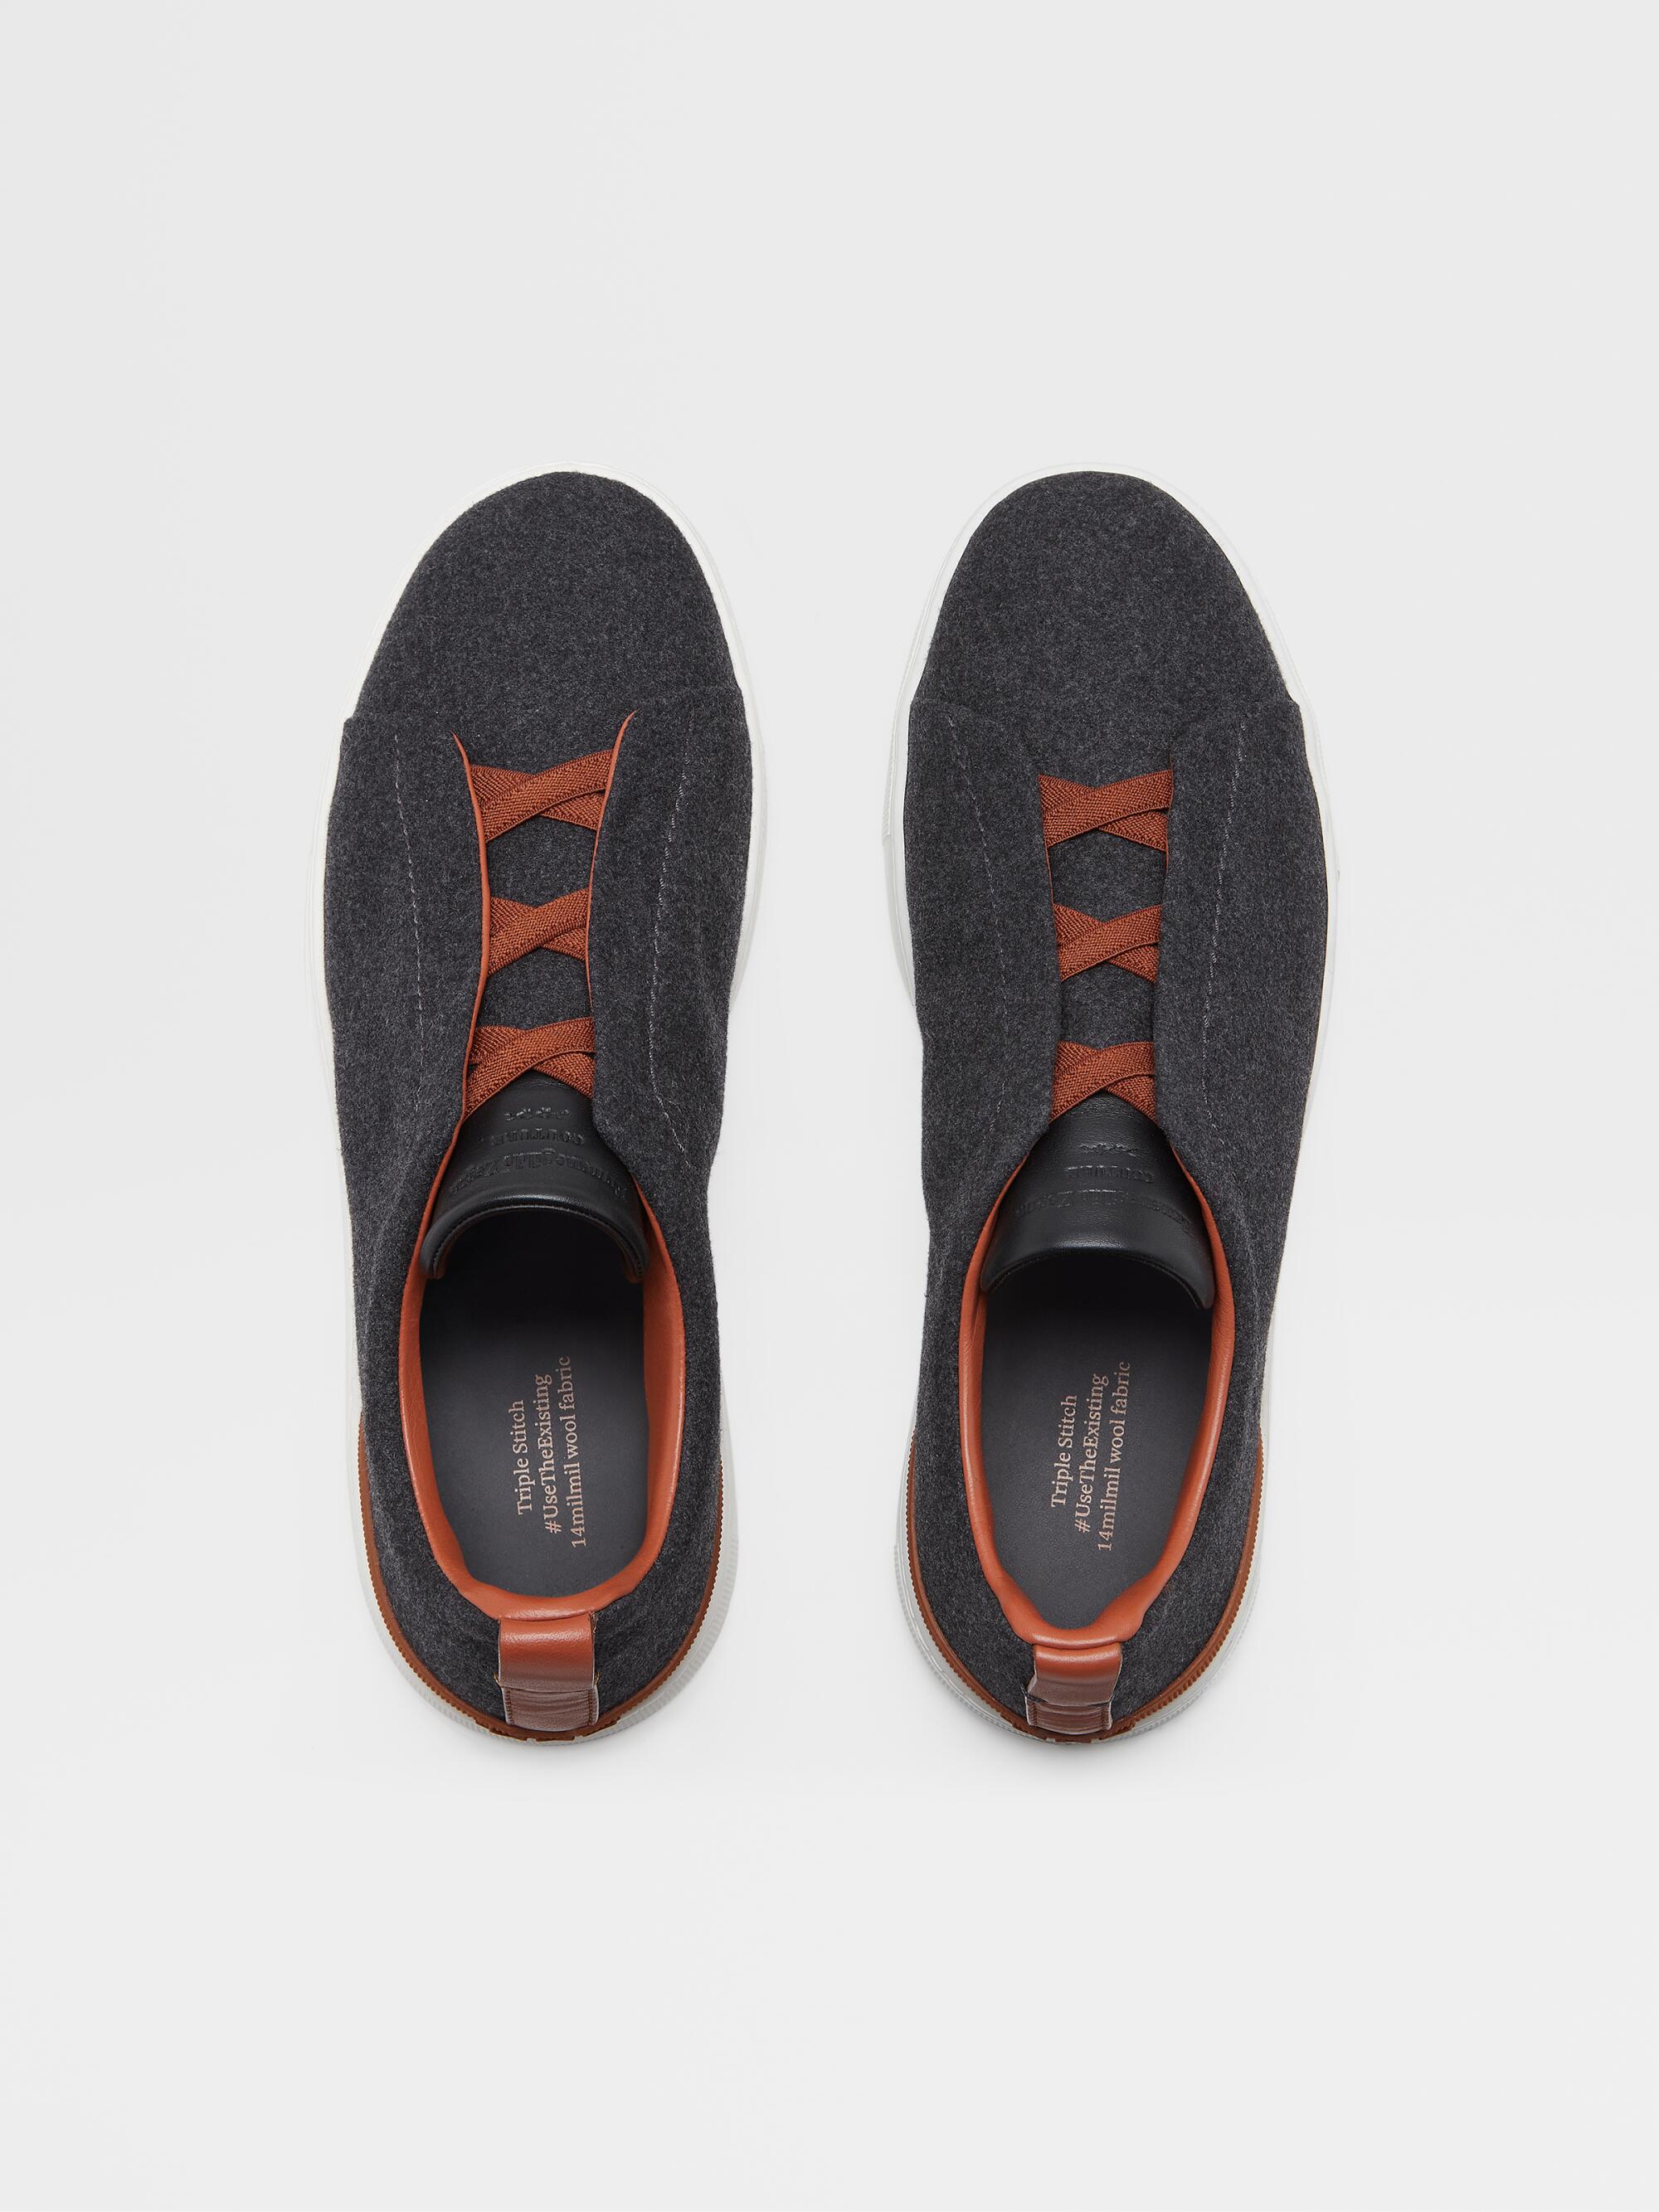 Dark gray Zegna sneakers with orange laces and details